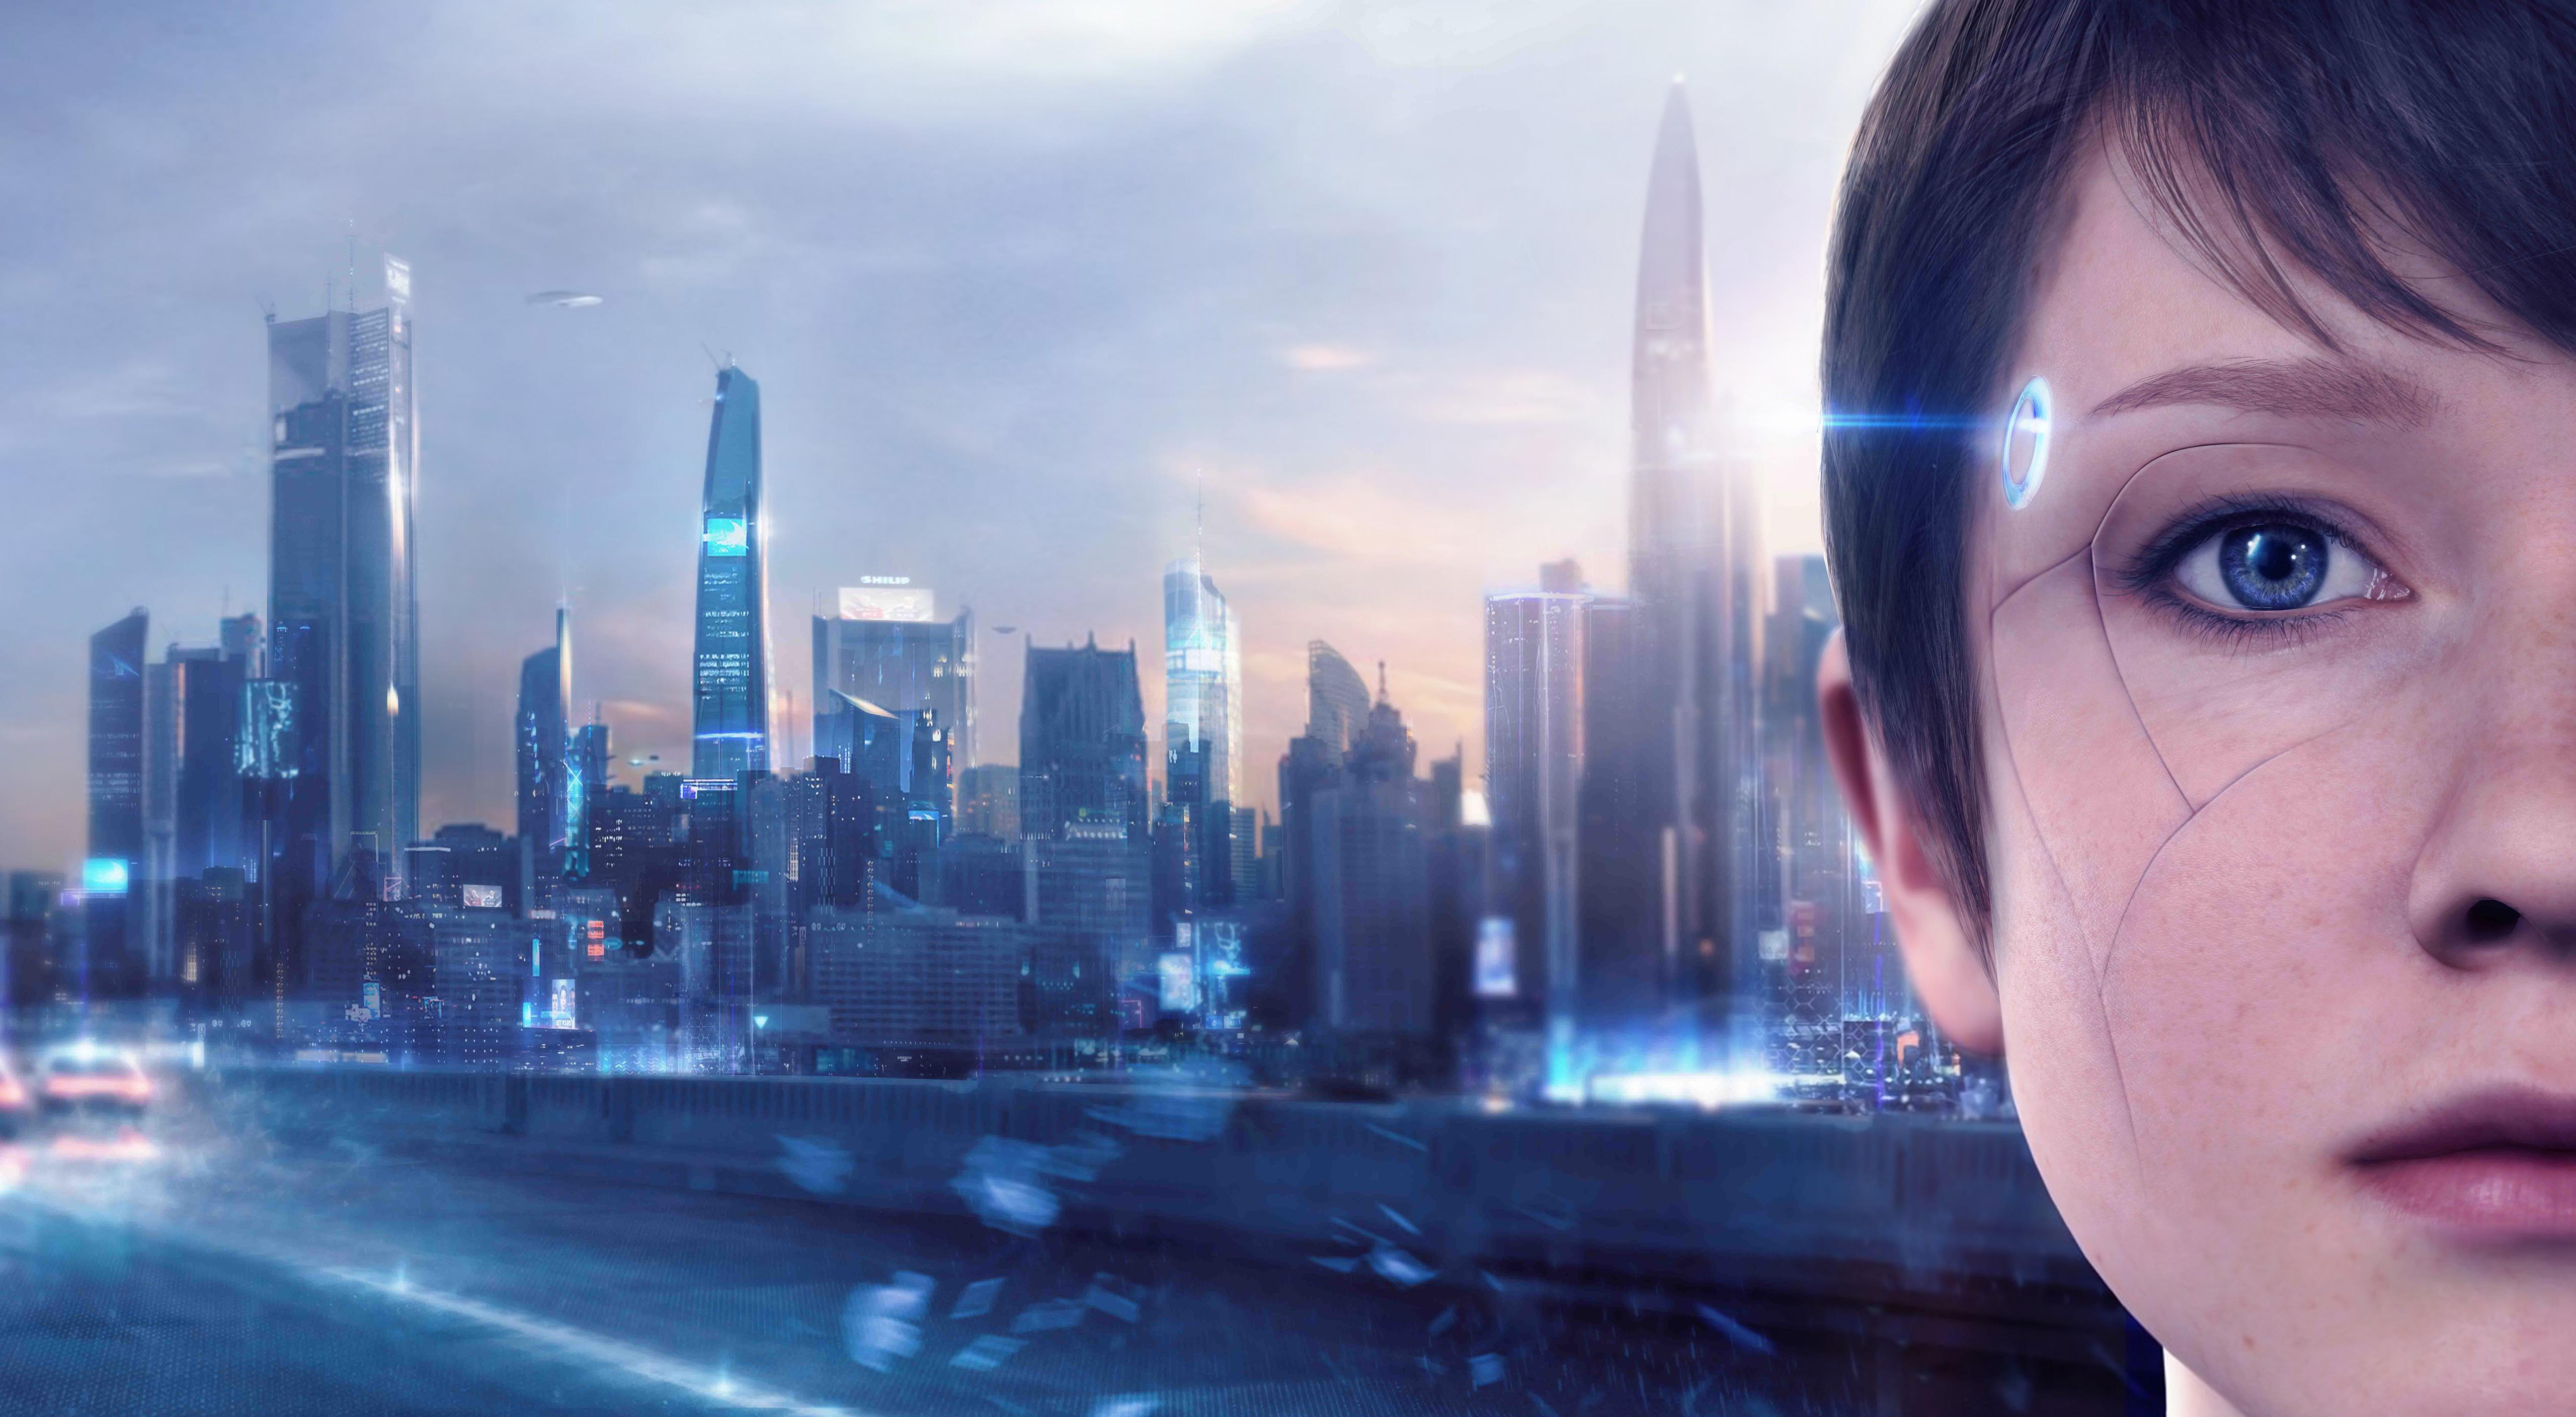 Detroit Become Human 5k, HD Games, 4k Wallpapers, Image.